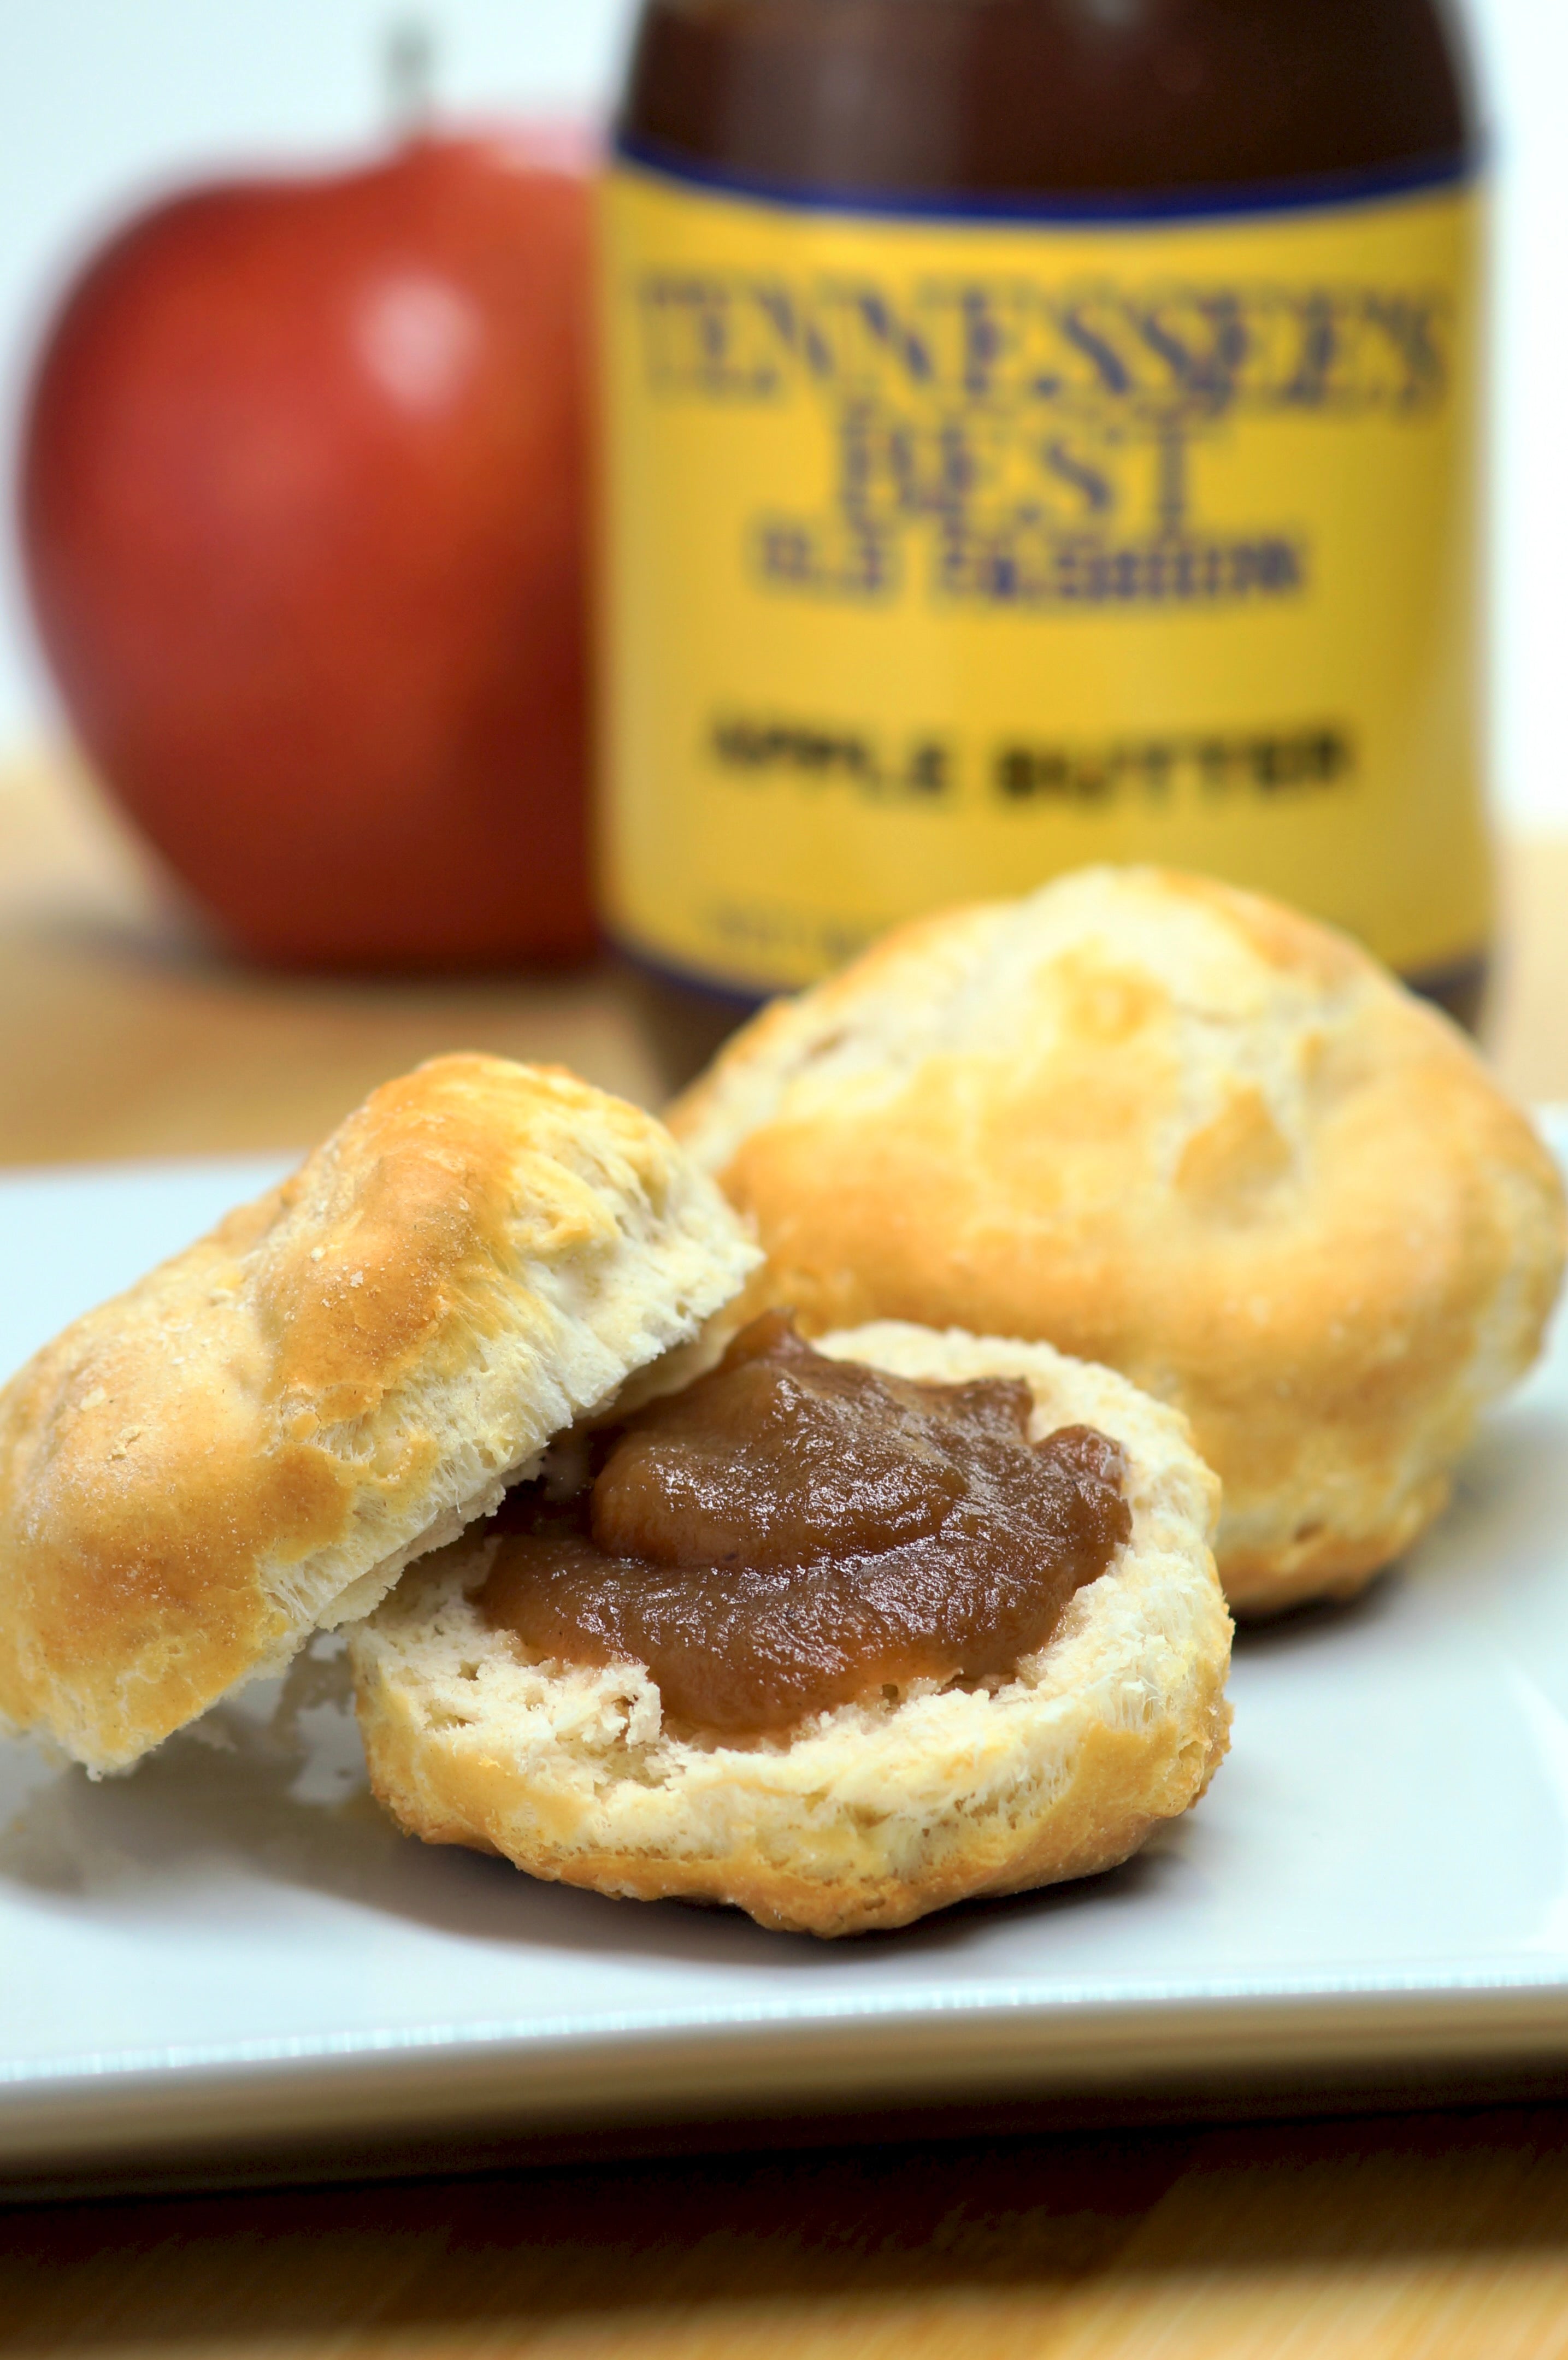 Tennessee's Best Old Fashion Style Apple Butter